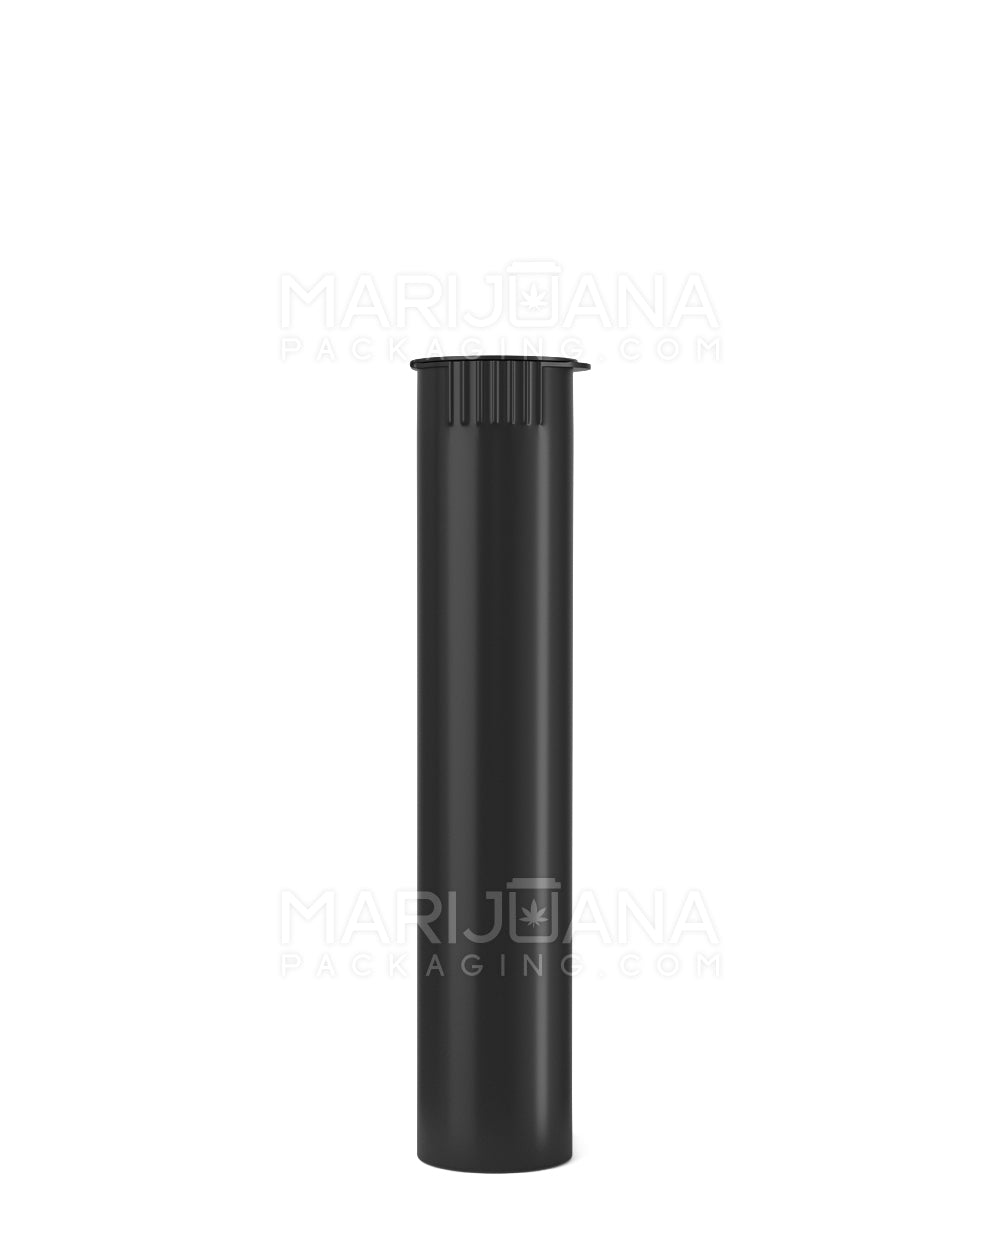 Child Resistant & Sustainable | 100% Biodegradable Pop Top Plastic Pre-Roll Tubes | 95mm - Black - 1000 Count - 2